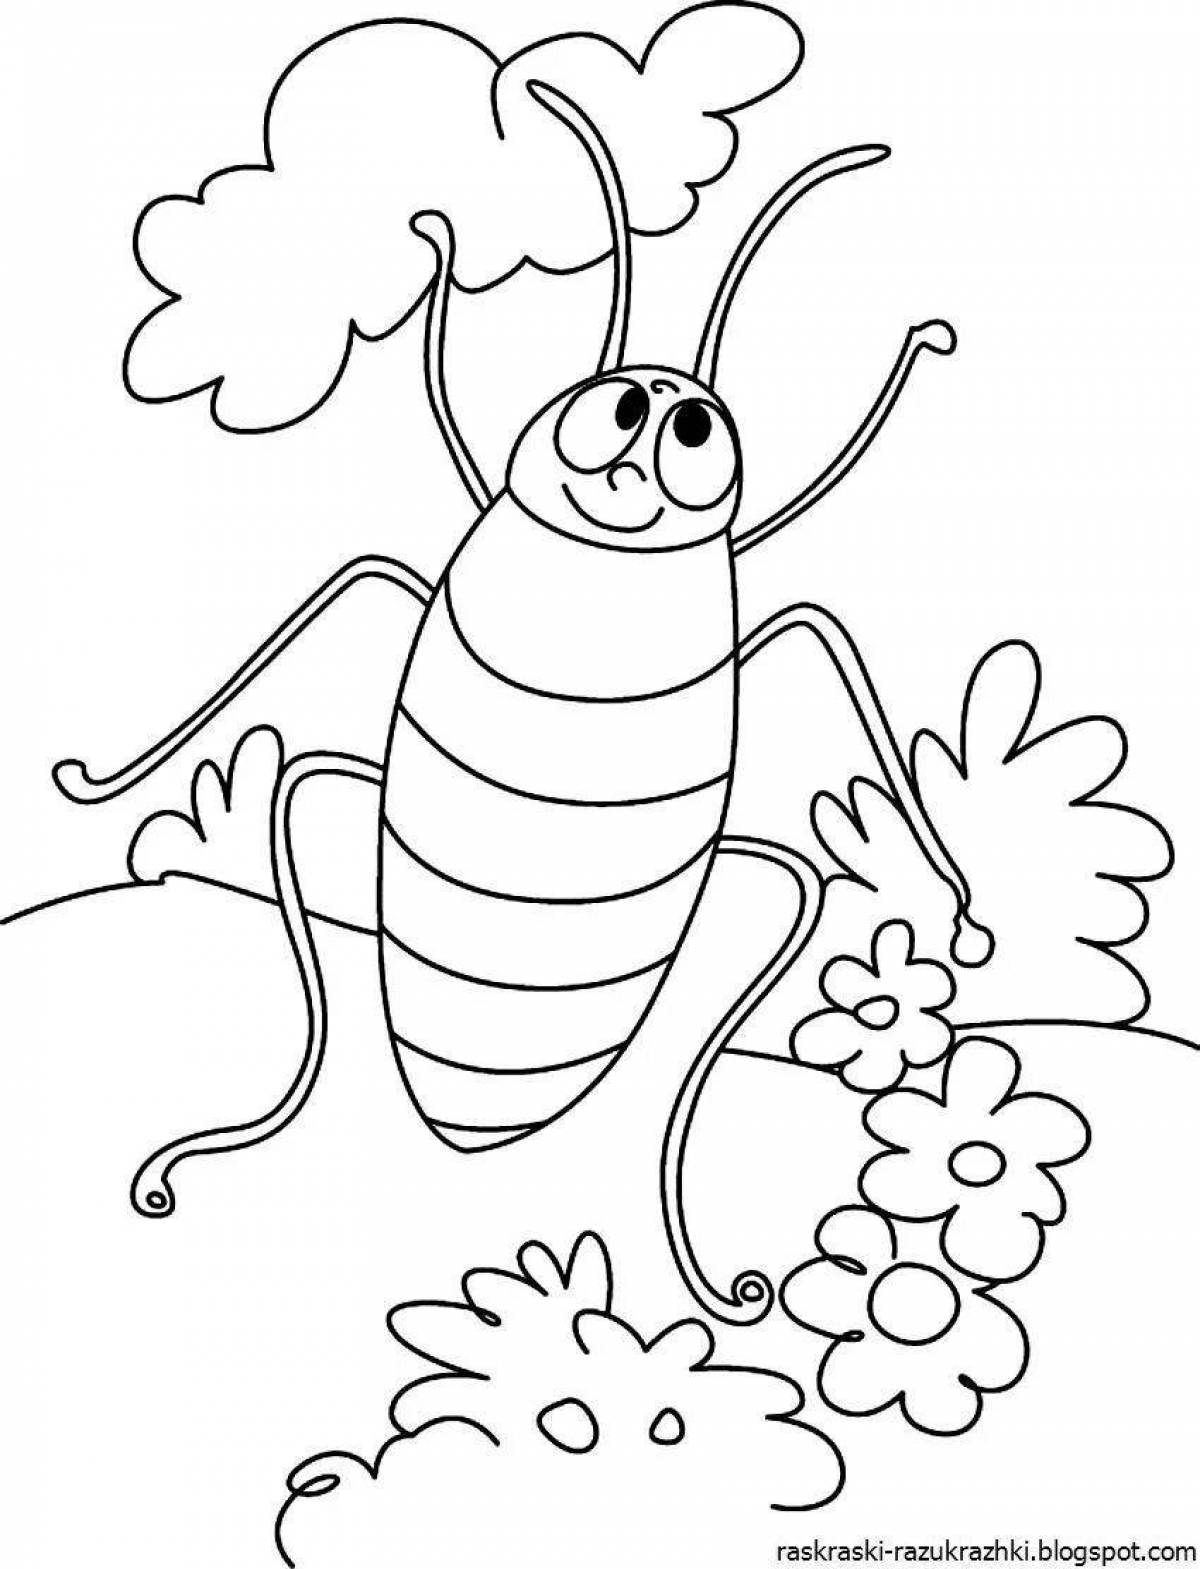 Essential coloring pages heroes of Chukovsky's fairy tales